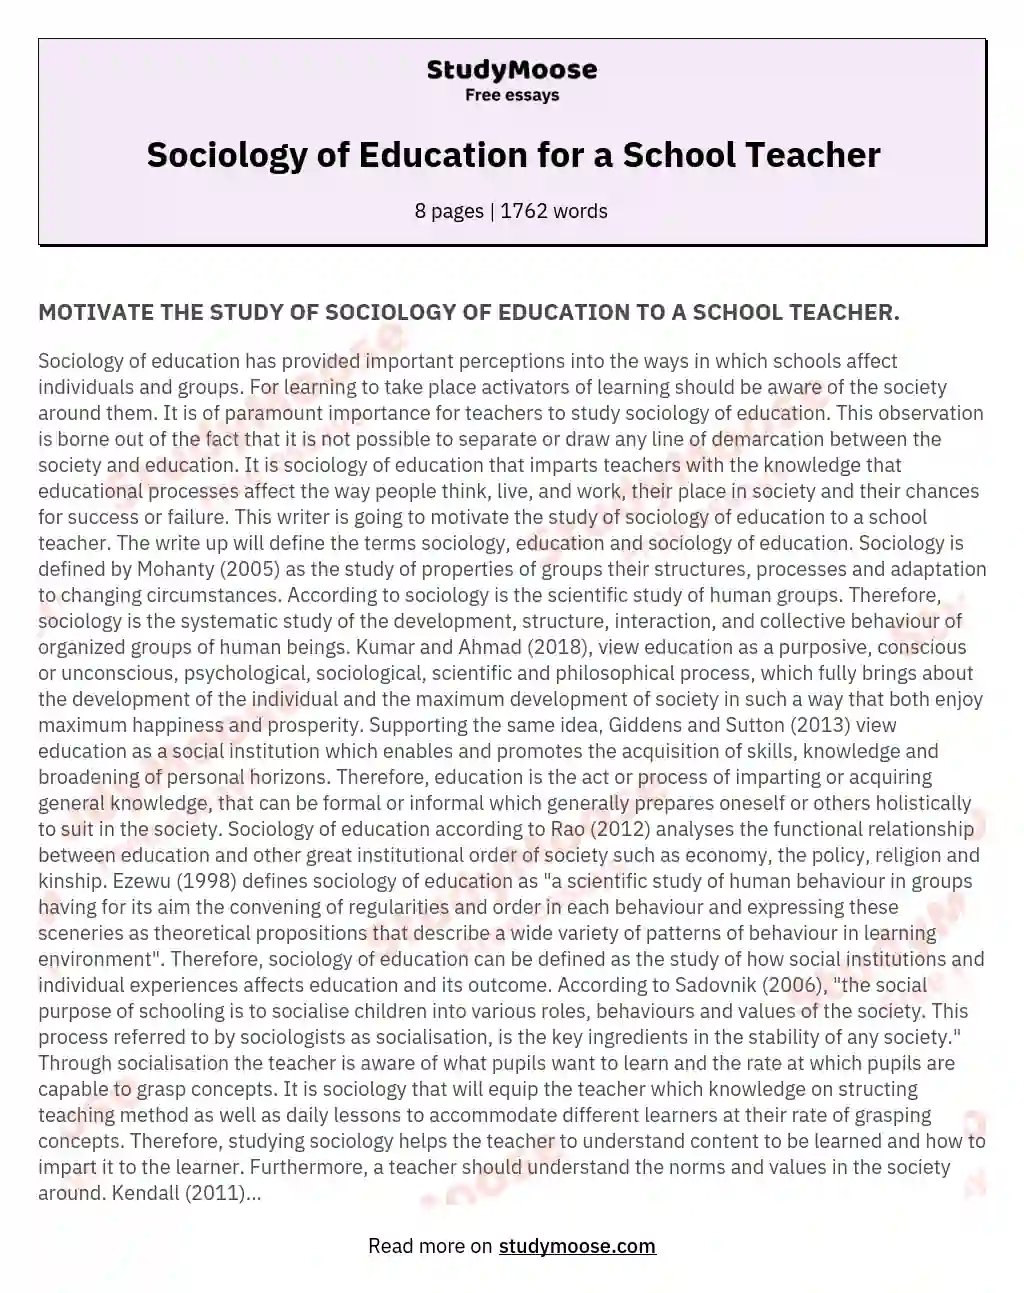 uk essay the importance of sociology to a teacher